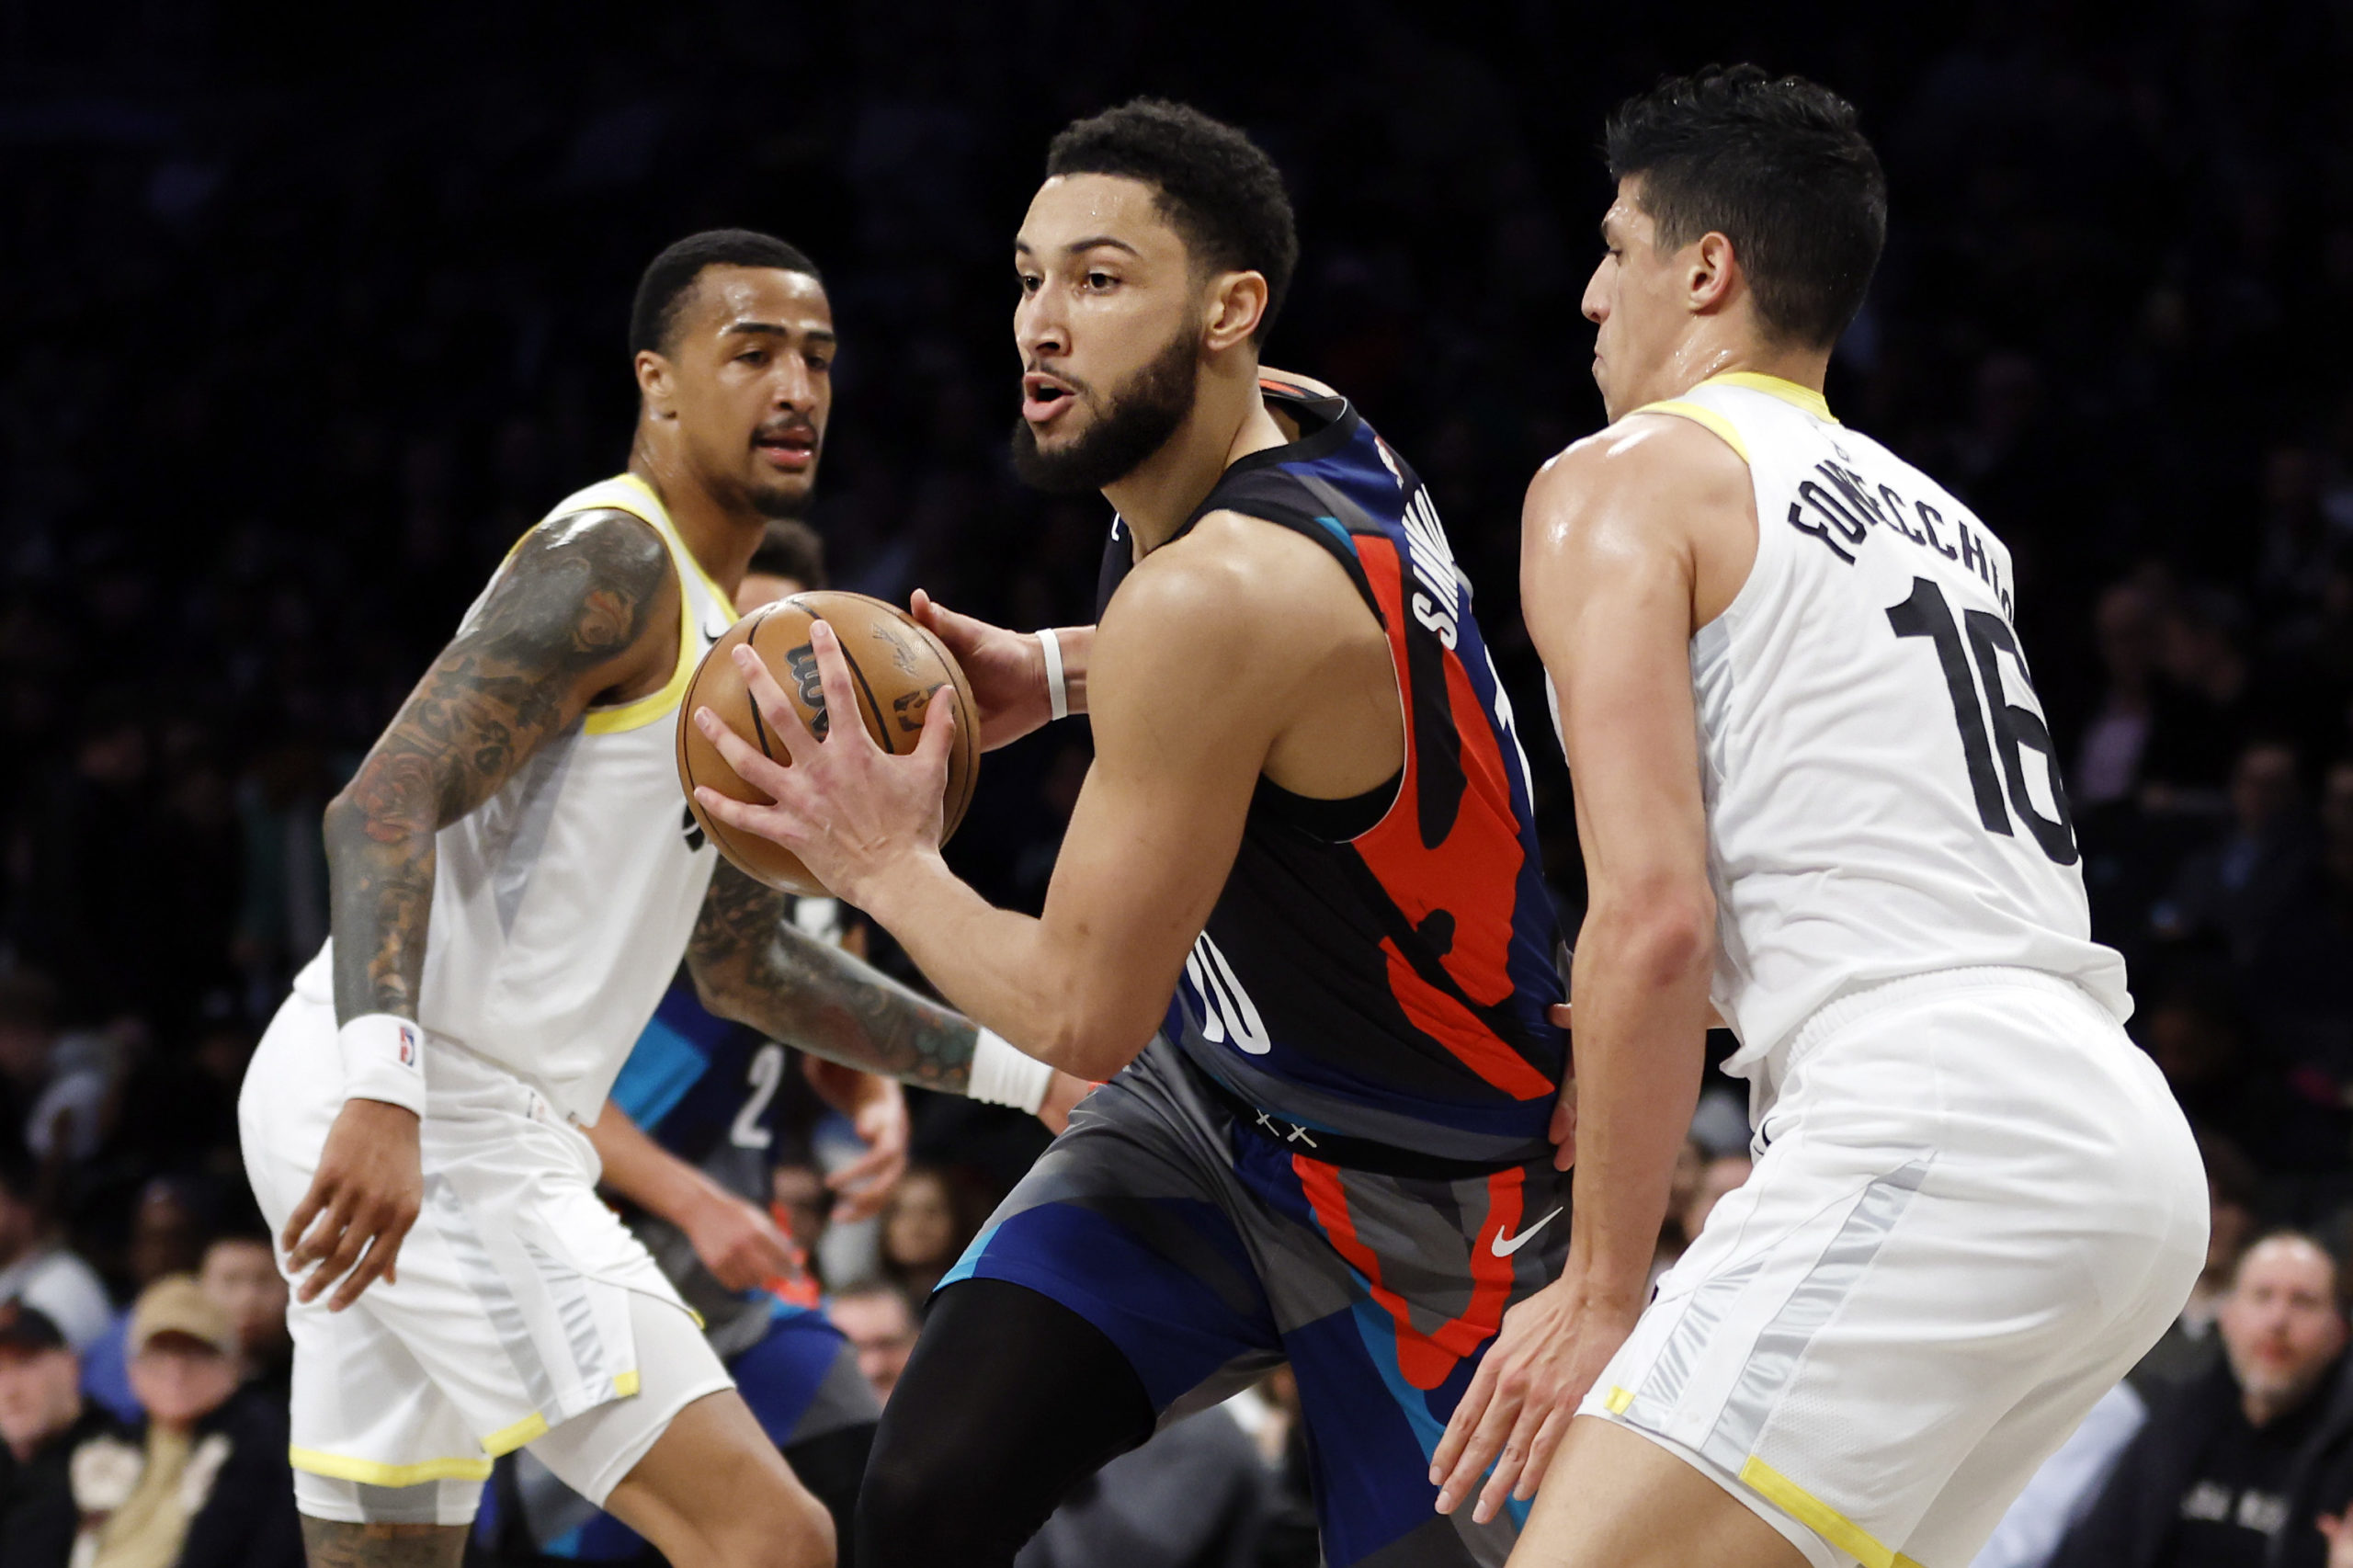 NEW YORK, NEW YORK - JANUARY 29: Ben Simmons #10 of the Brooklyn Nets dribbles against Simone Fontecchio #16 and John Collins #20 of the Utah Jazz during the second half at Barclays Center on January 29, 2024 in the Brooklyn borough of New York City. The Nets won 147-114. Sarah Stier/Getty Images